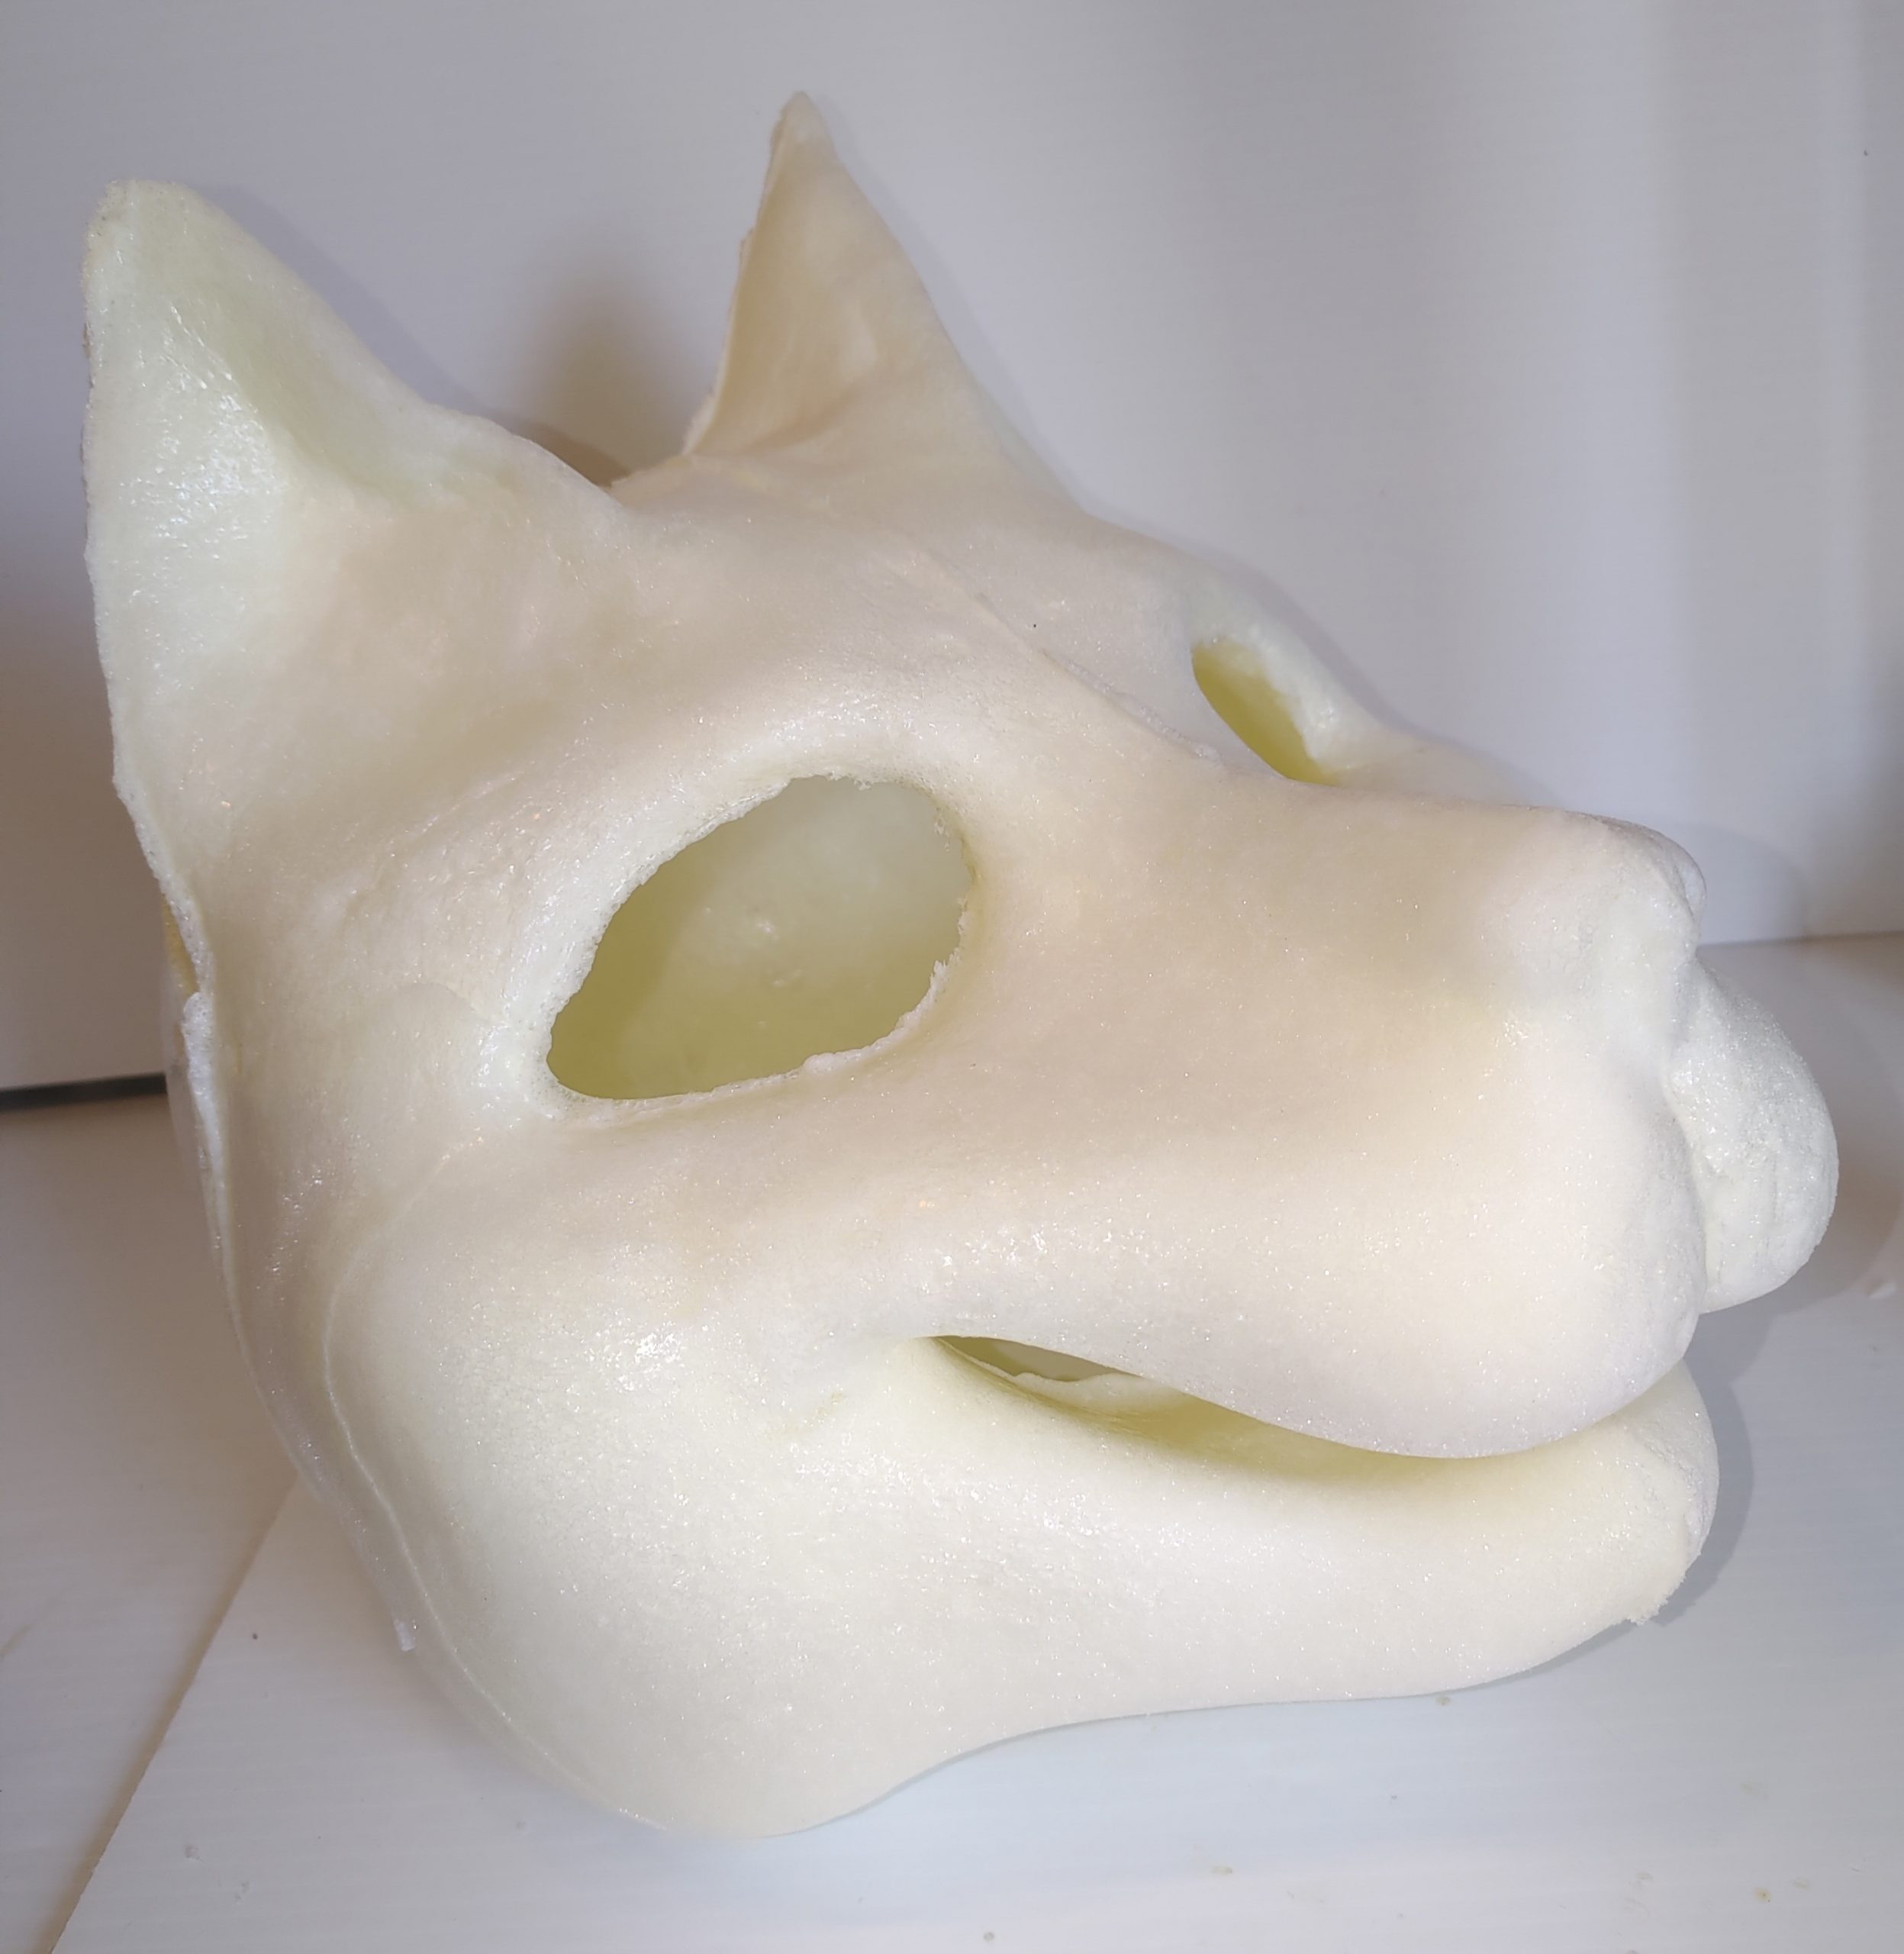 Rose the Cat, Furry Fursuit Foam Full Head Base for Fursuiting, For Furries  and Cosplay - DIY - fhb14